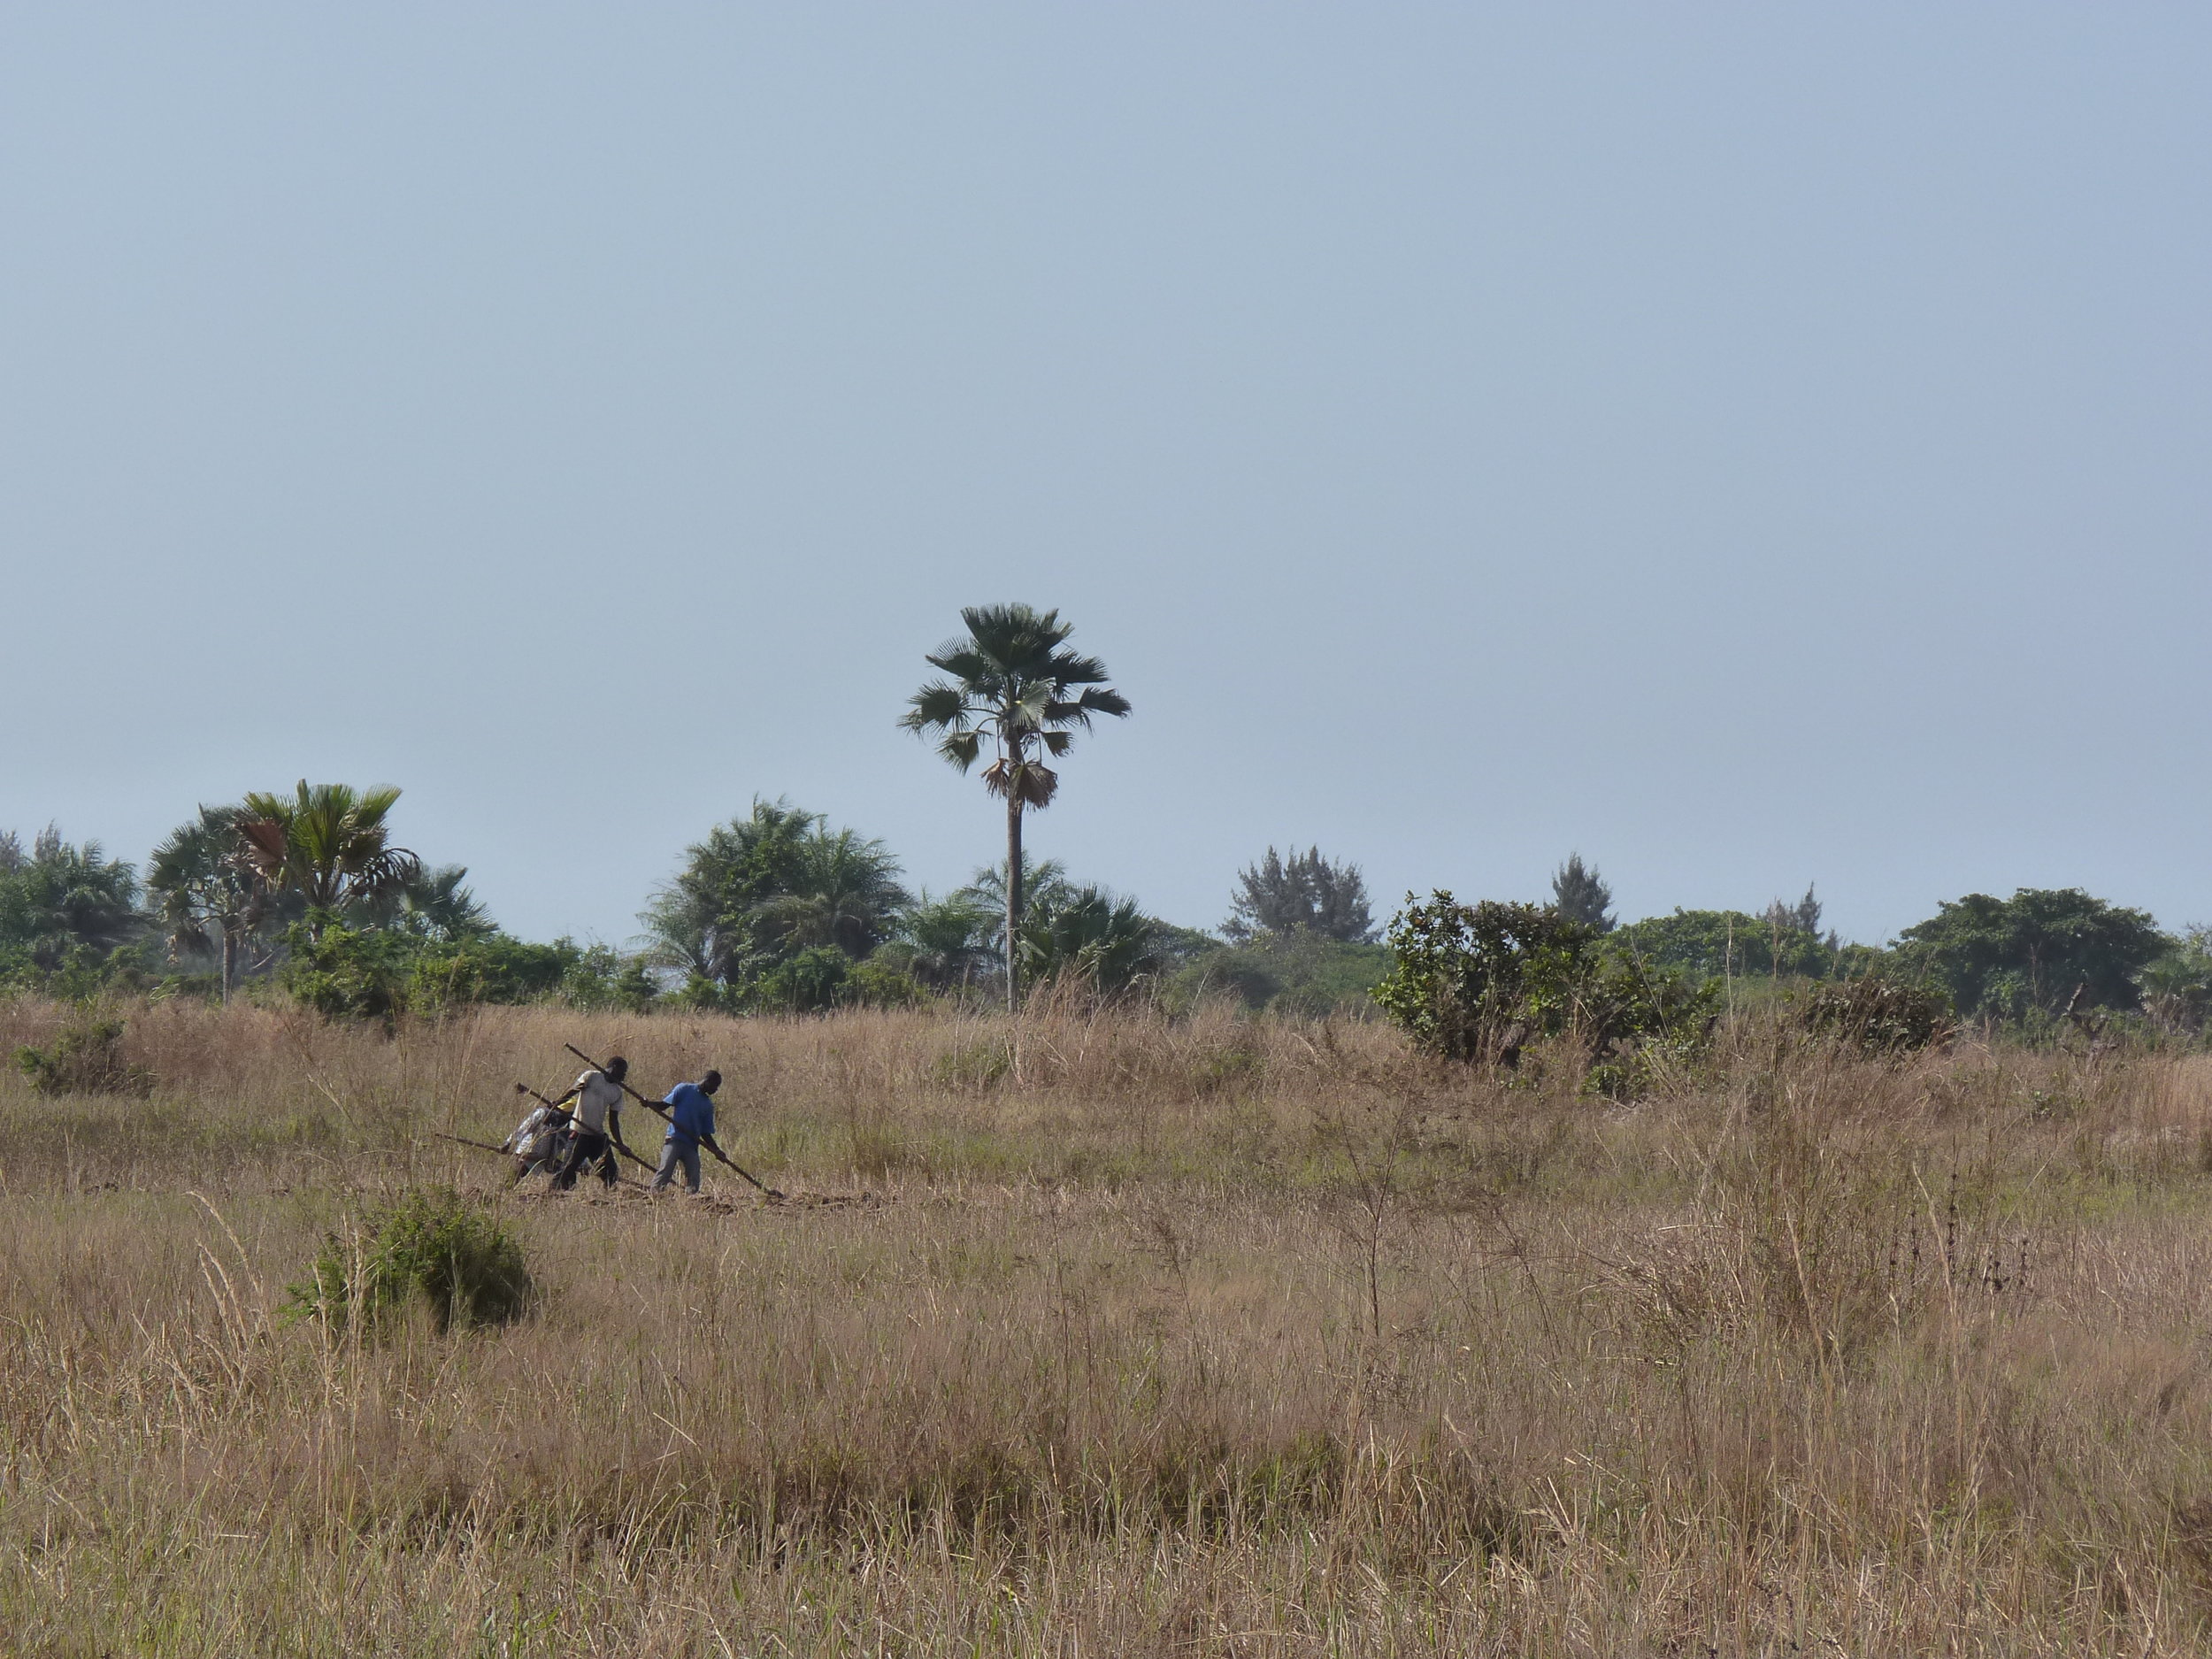 Farmers working the fields in the Casamance